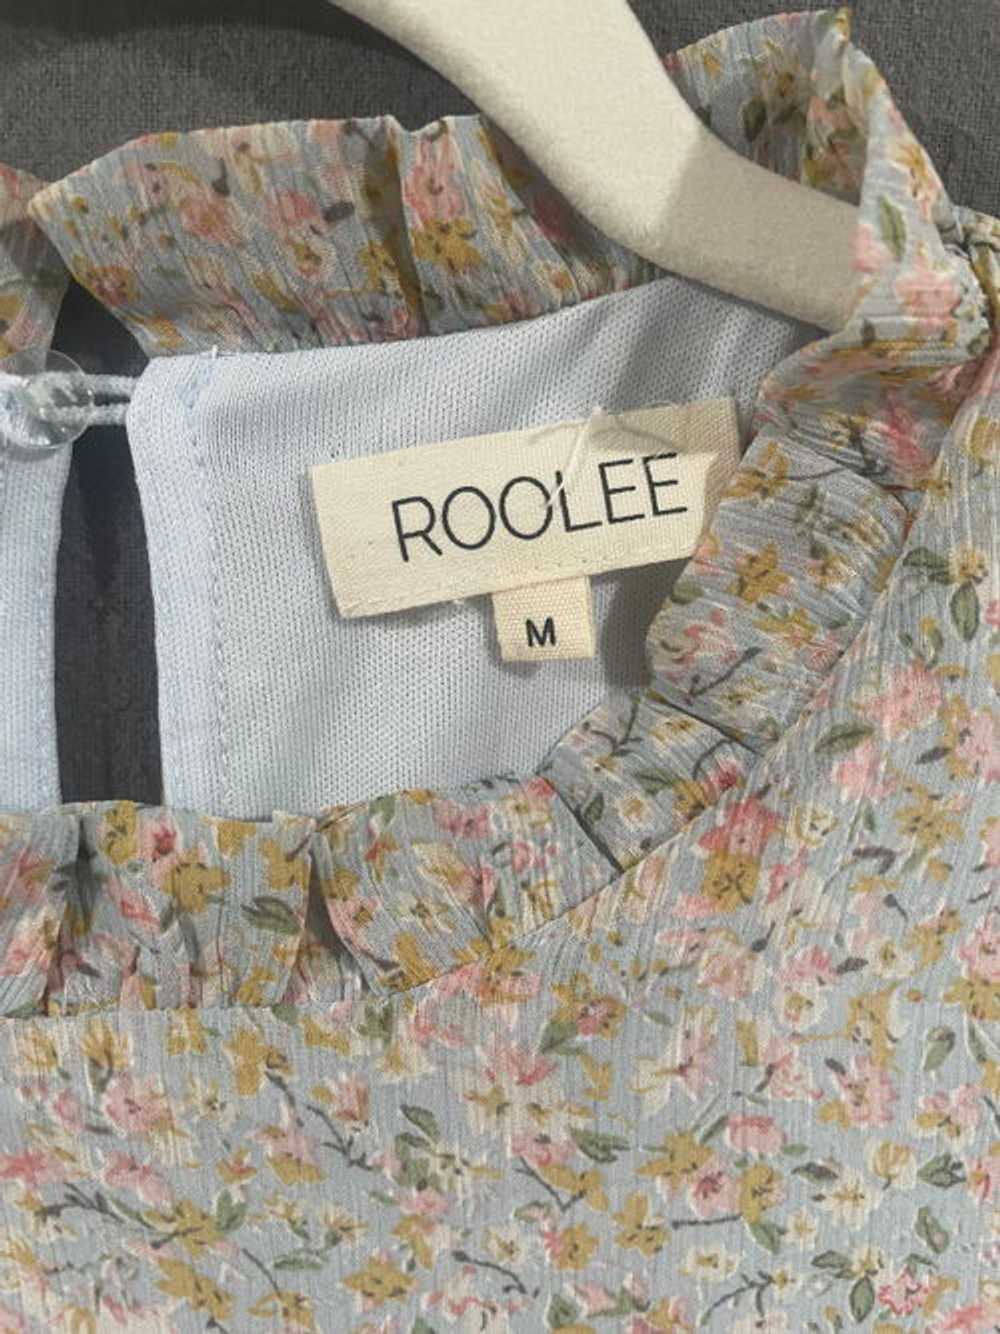 ROOLEE Everything is Going to Be Okay Blouse - image 5